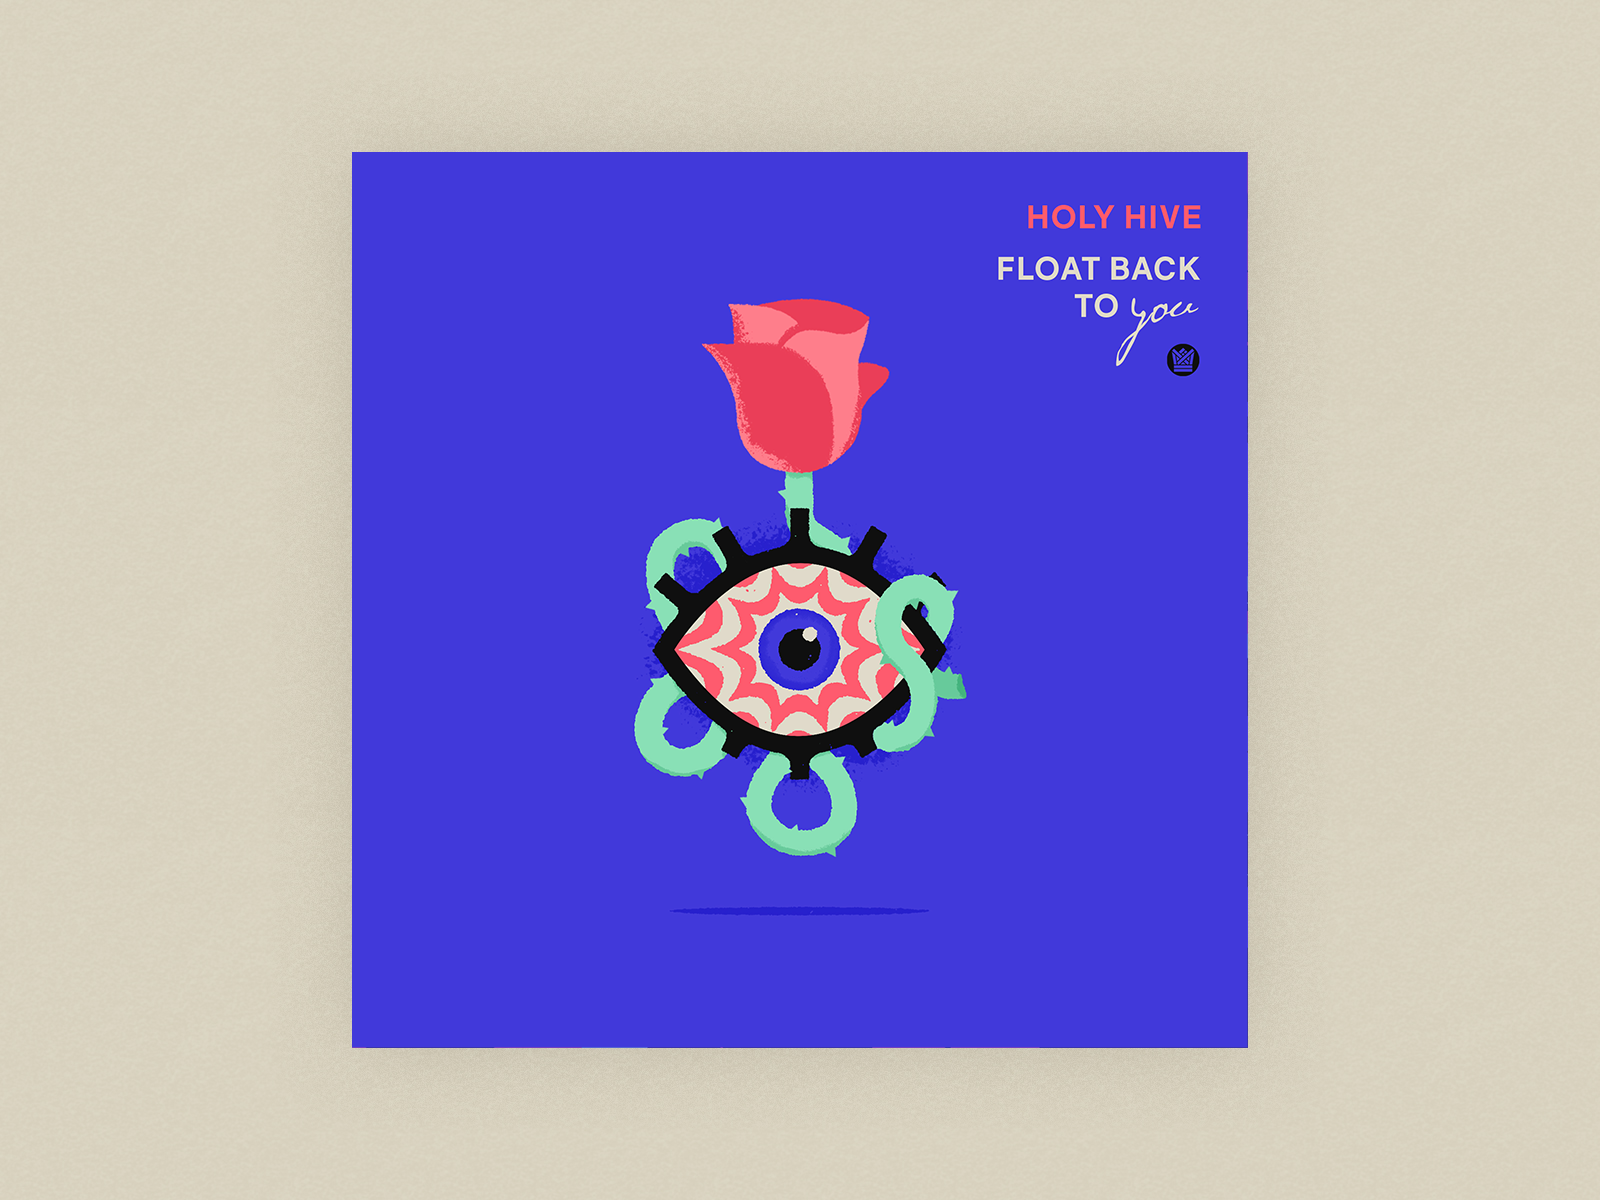 10x20 - 9: Float Back To You - Holy Hive by Alex Woltz on Dribbble